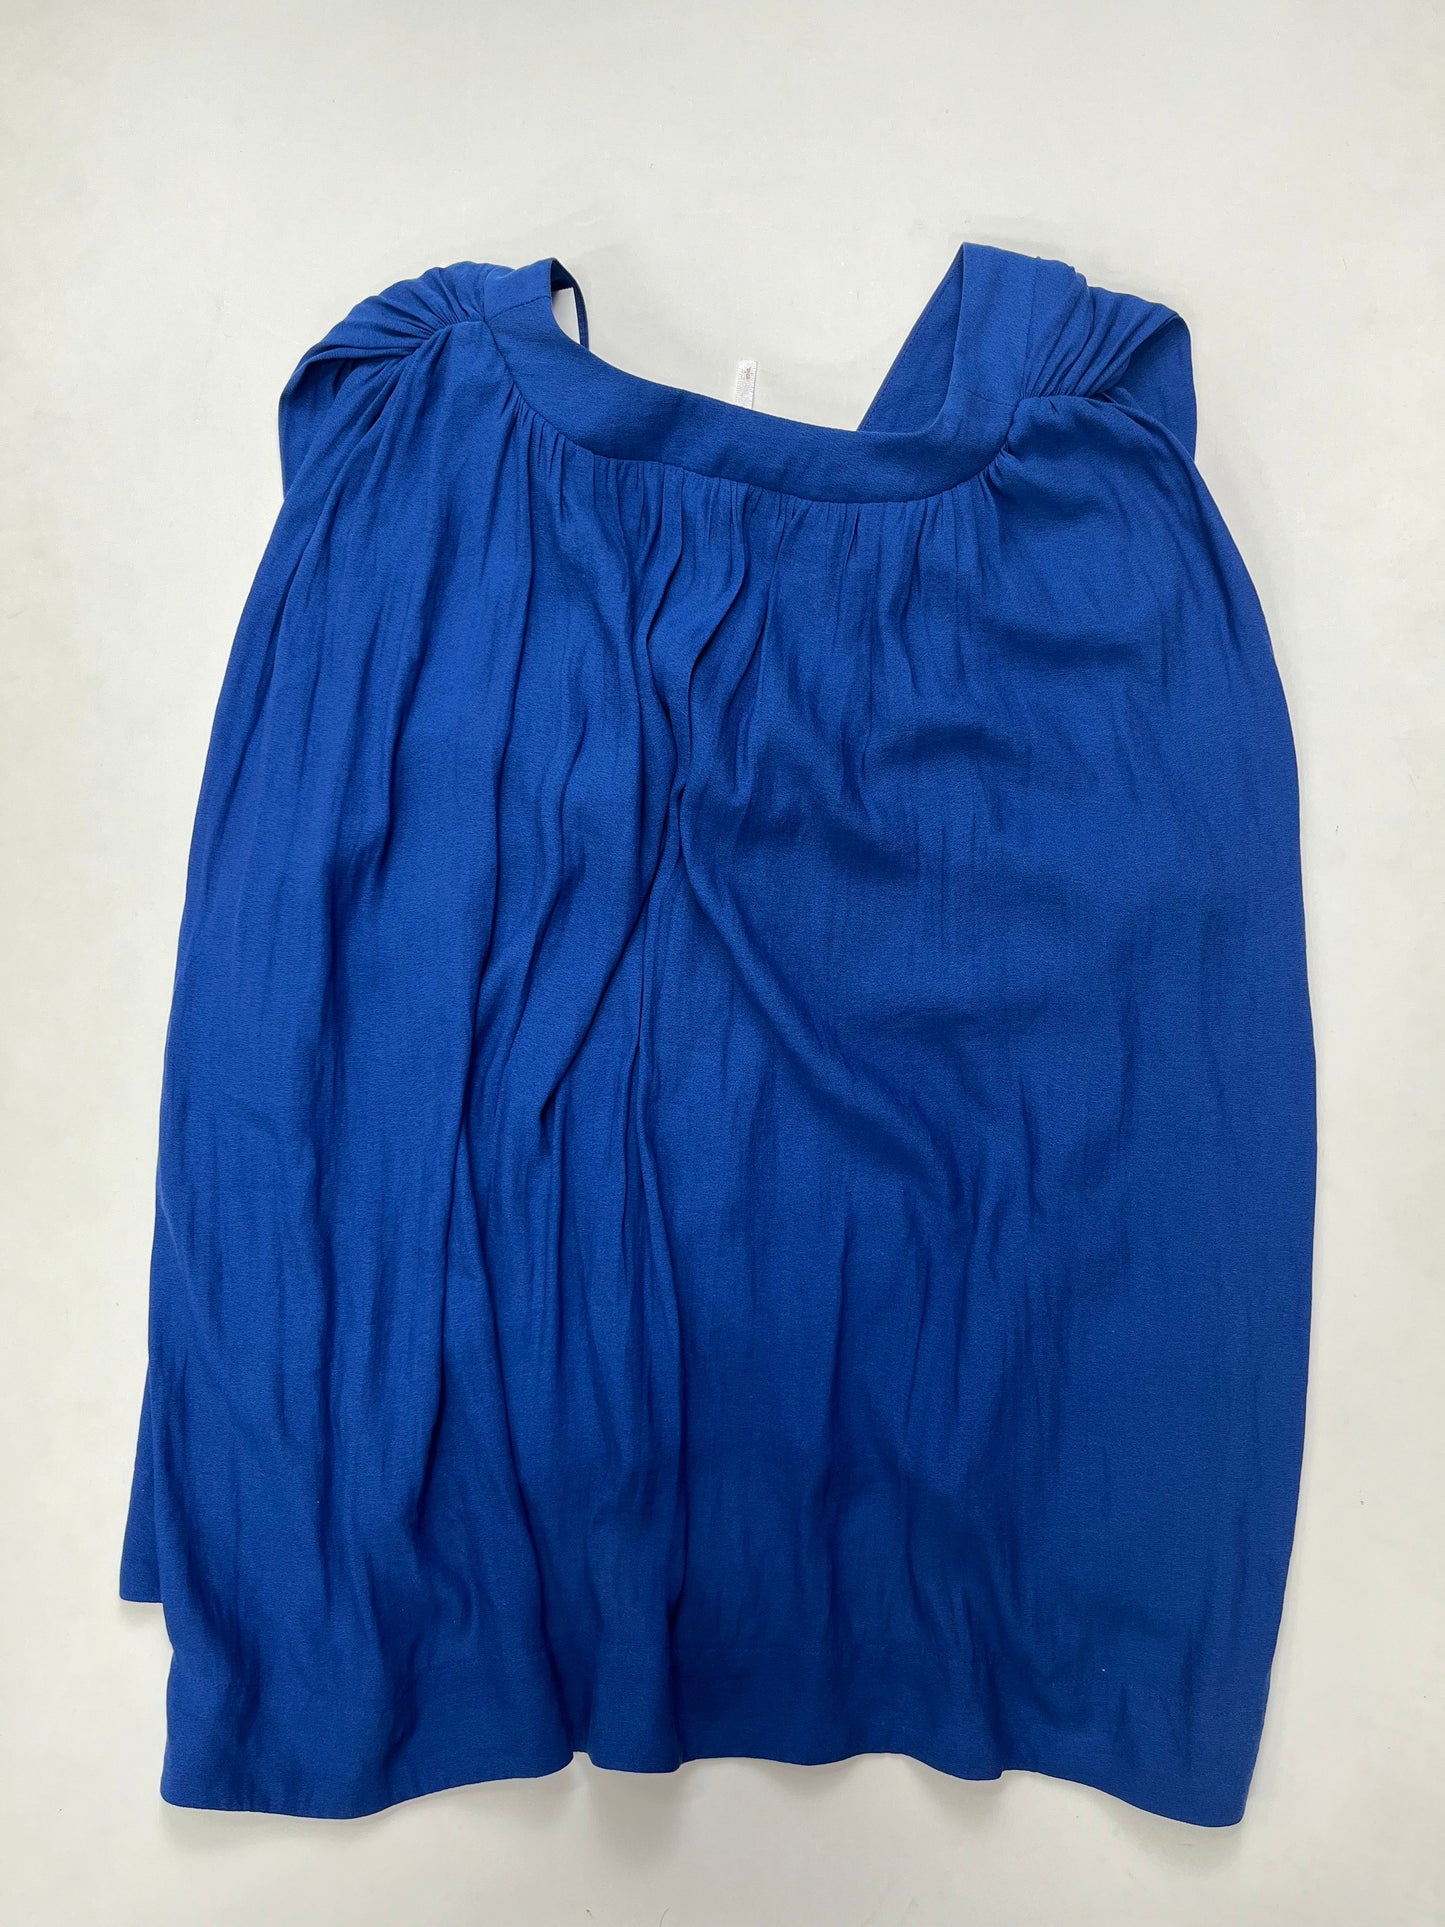 Royal Blue Blouse Long Sleeve Free People, Size S